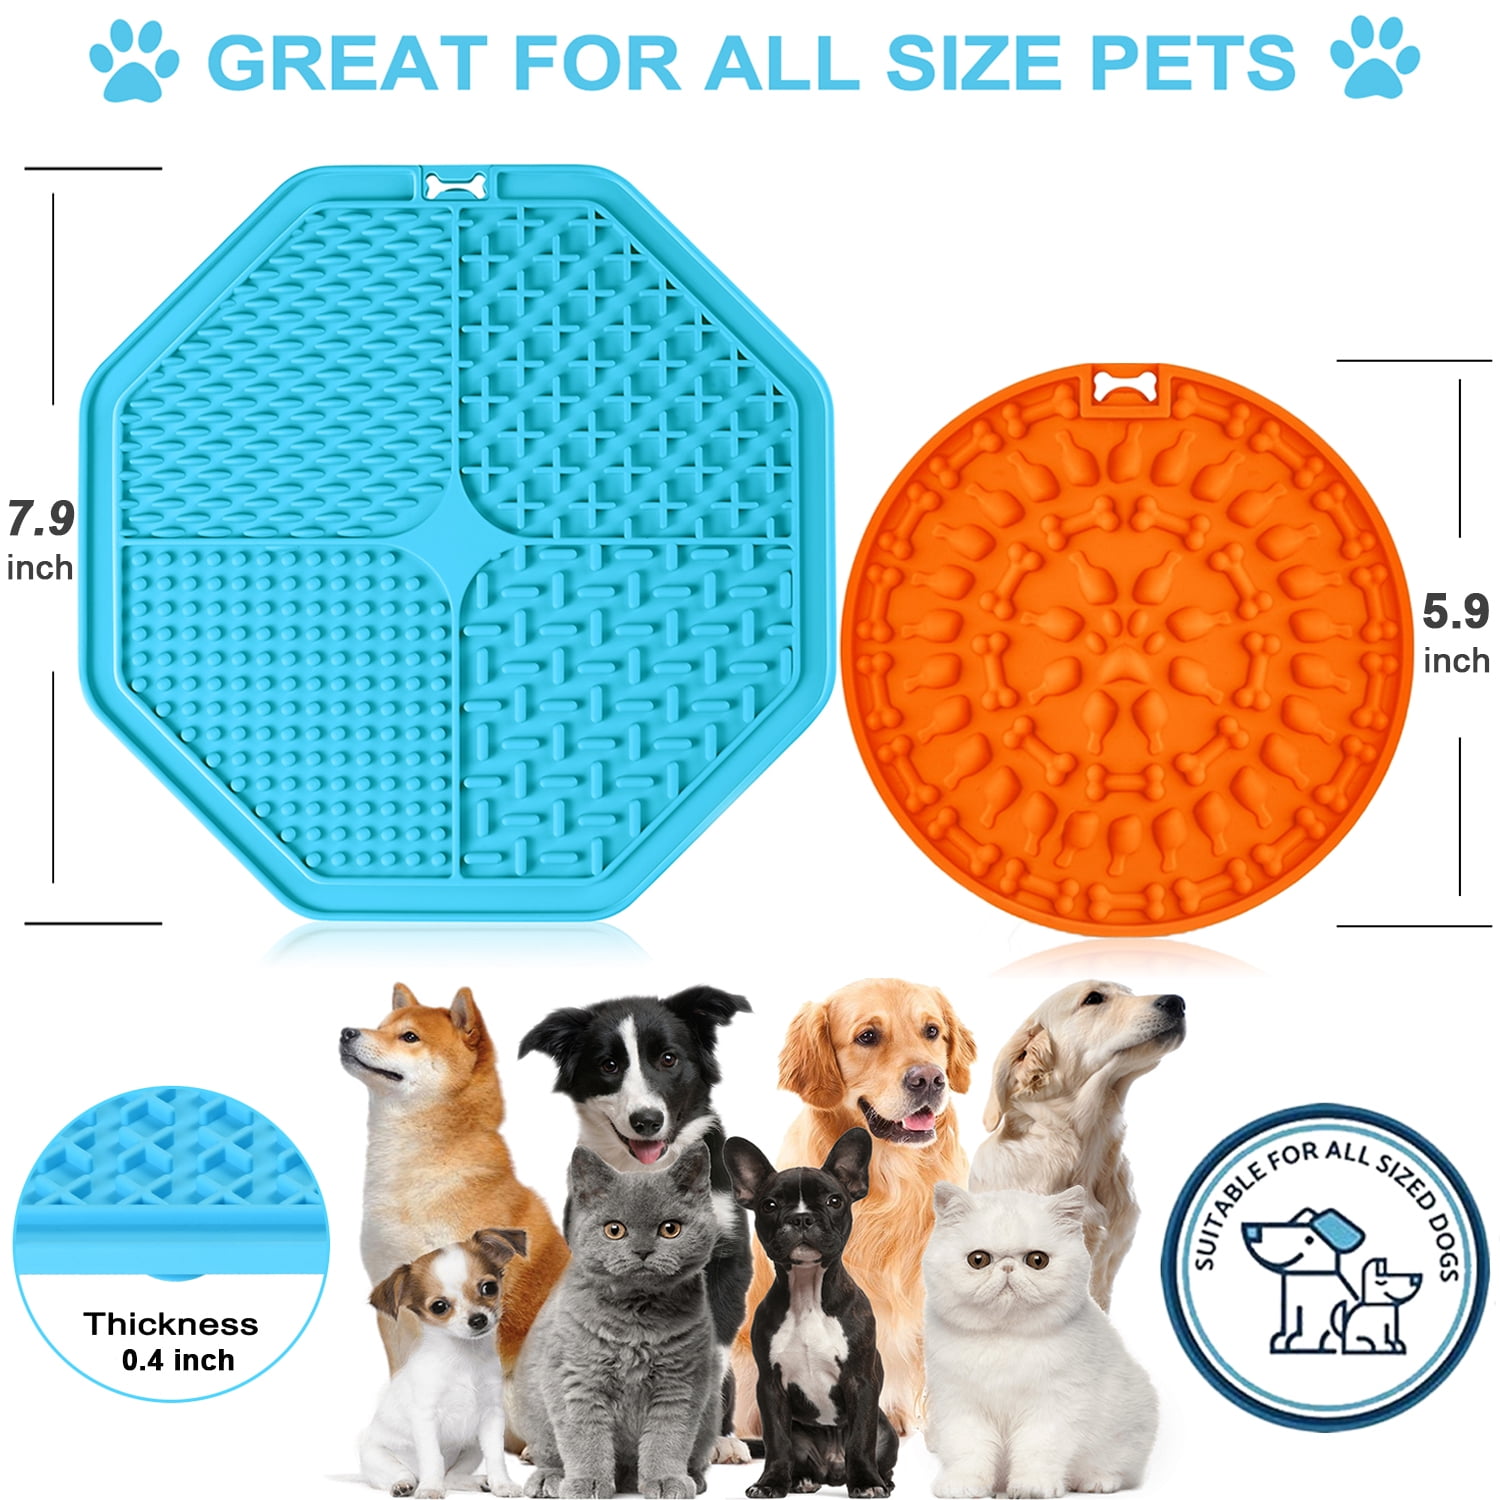 2 Pack Blue+greenpad For Dog Lick, Pet Mat Slow Feeders & Anxiety R